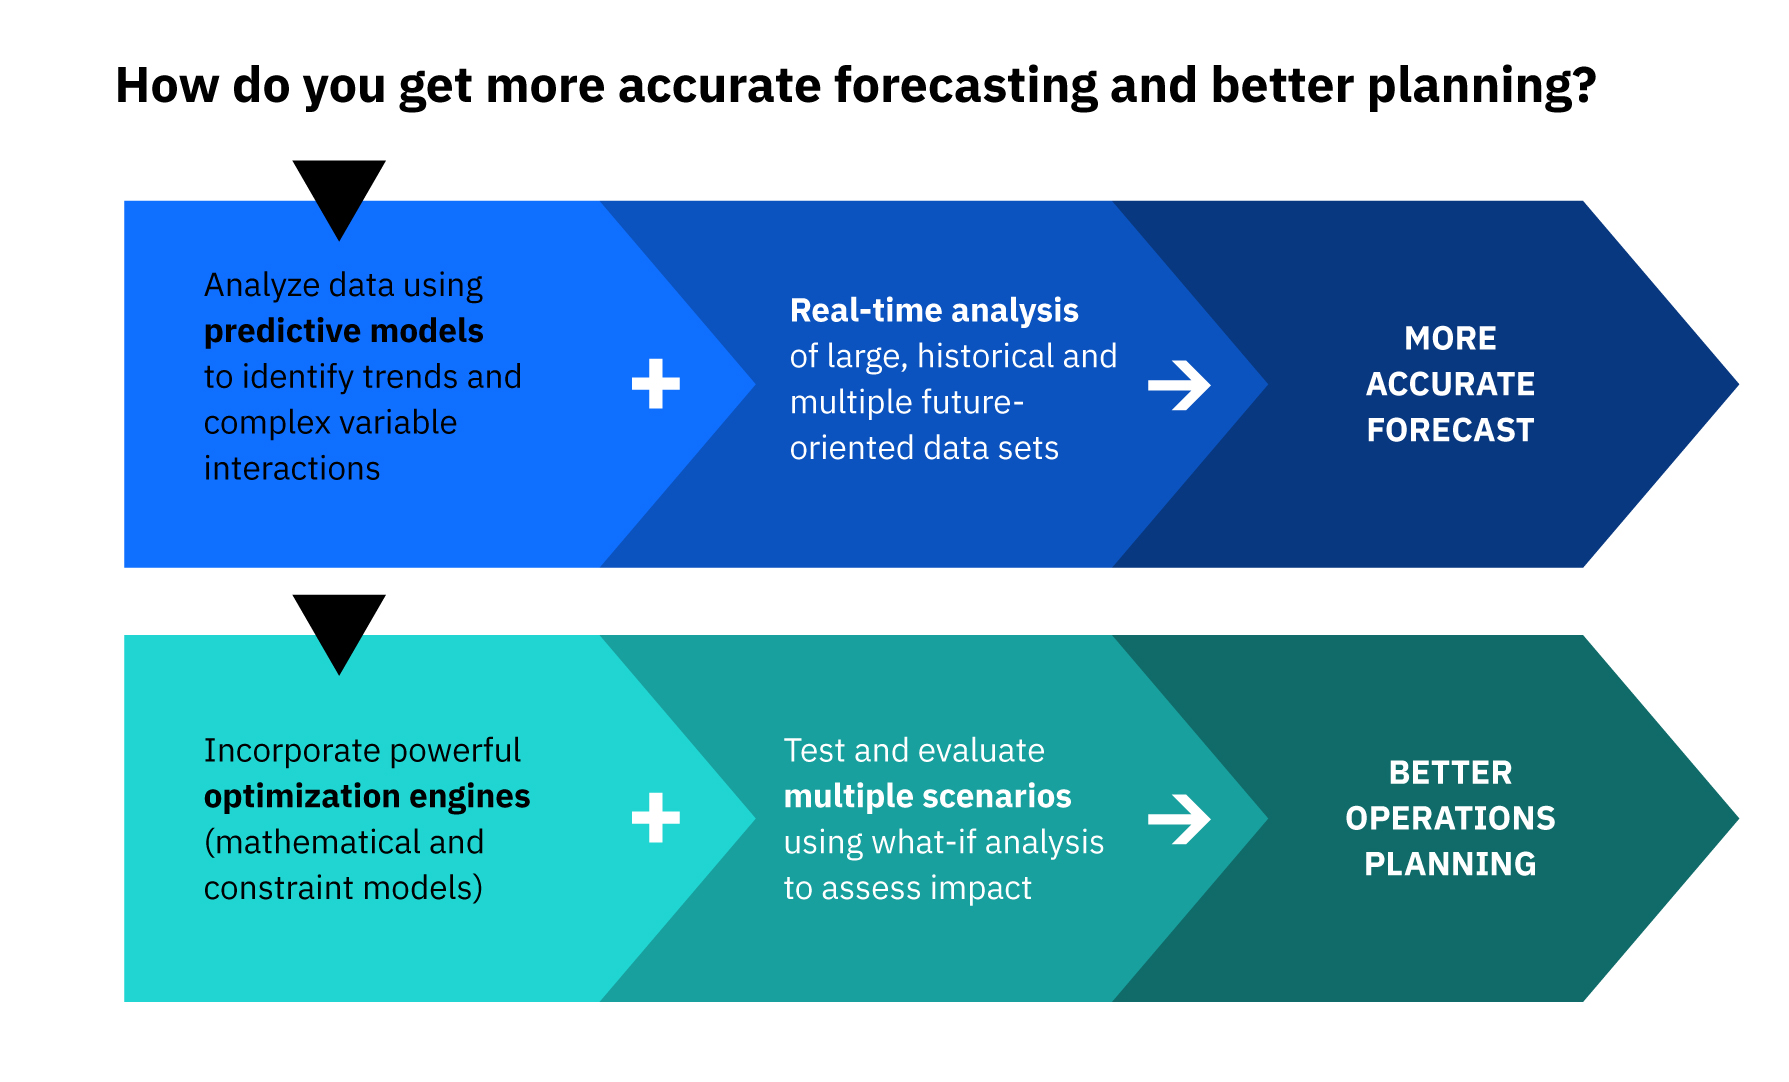 Graph that represents in a linear fashion how predictive modeling plus realtime analysis equals a more accurate forecast and how incorporating optimization engines plus evaluating multiple scenarios equals better operations planning.